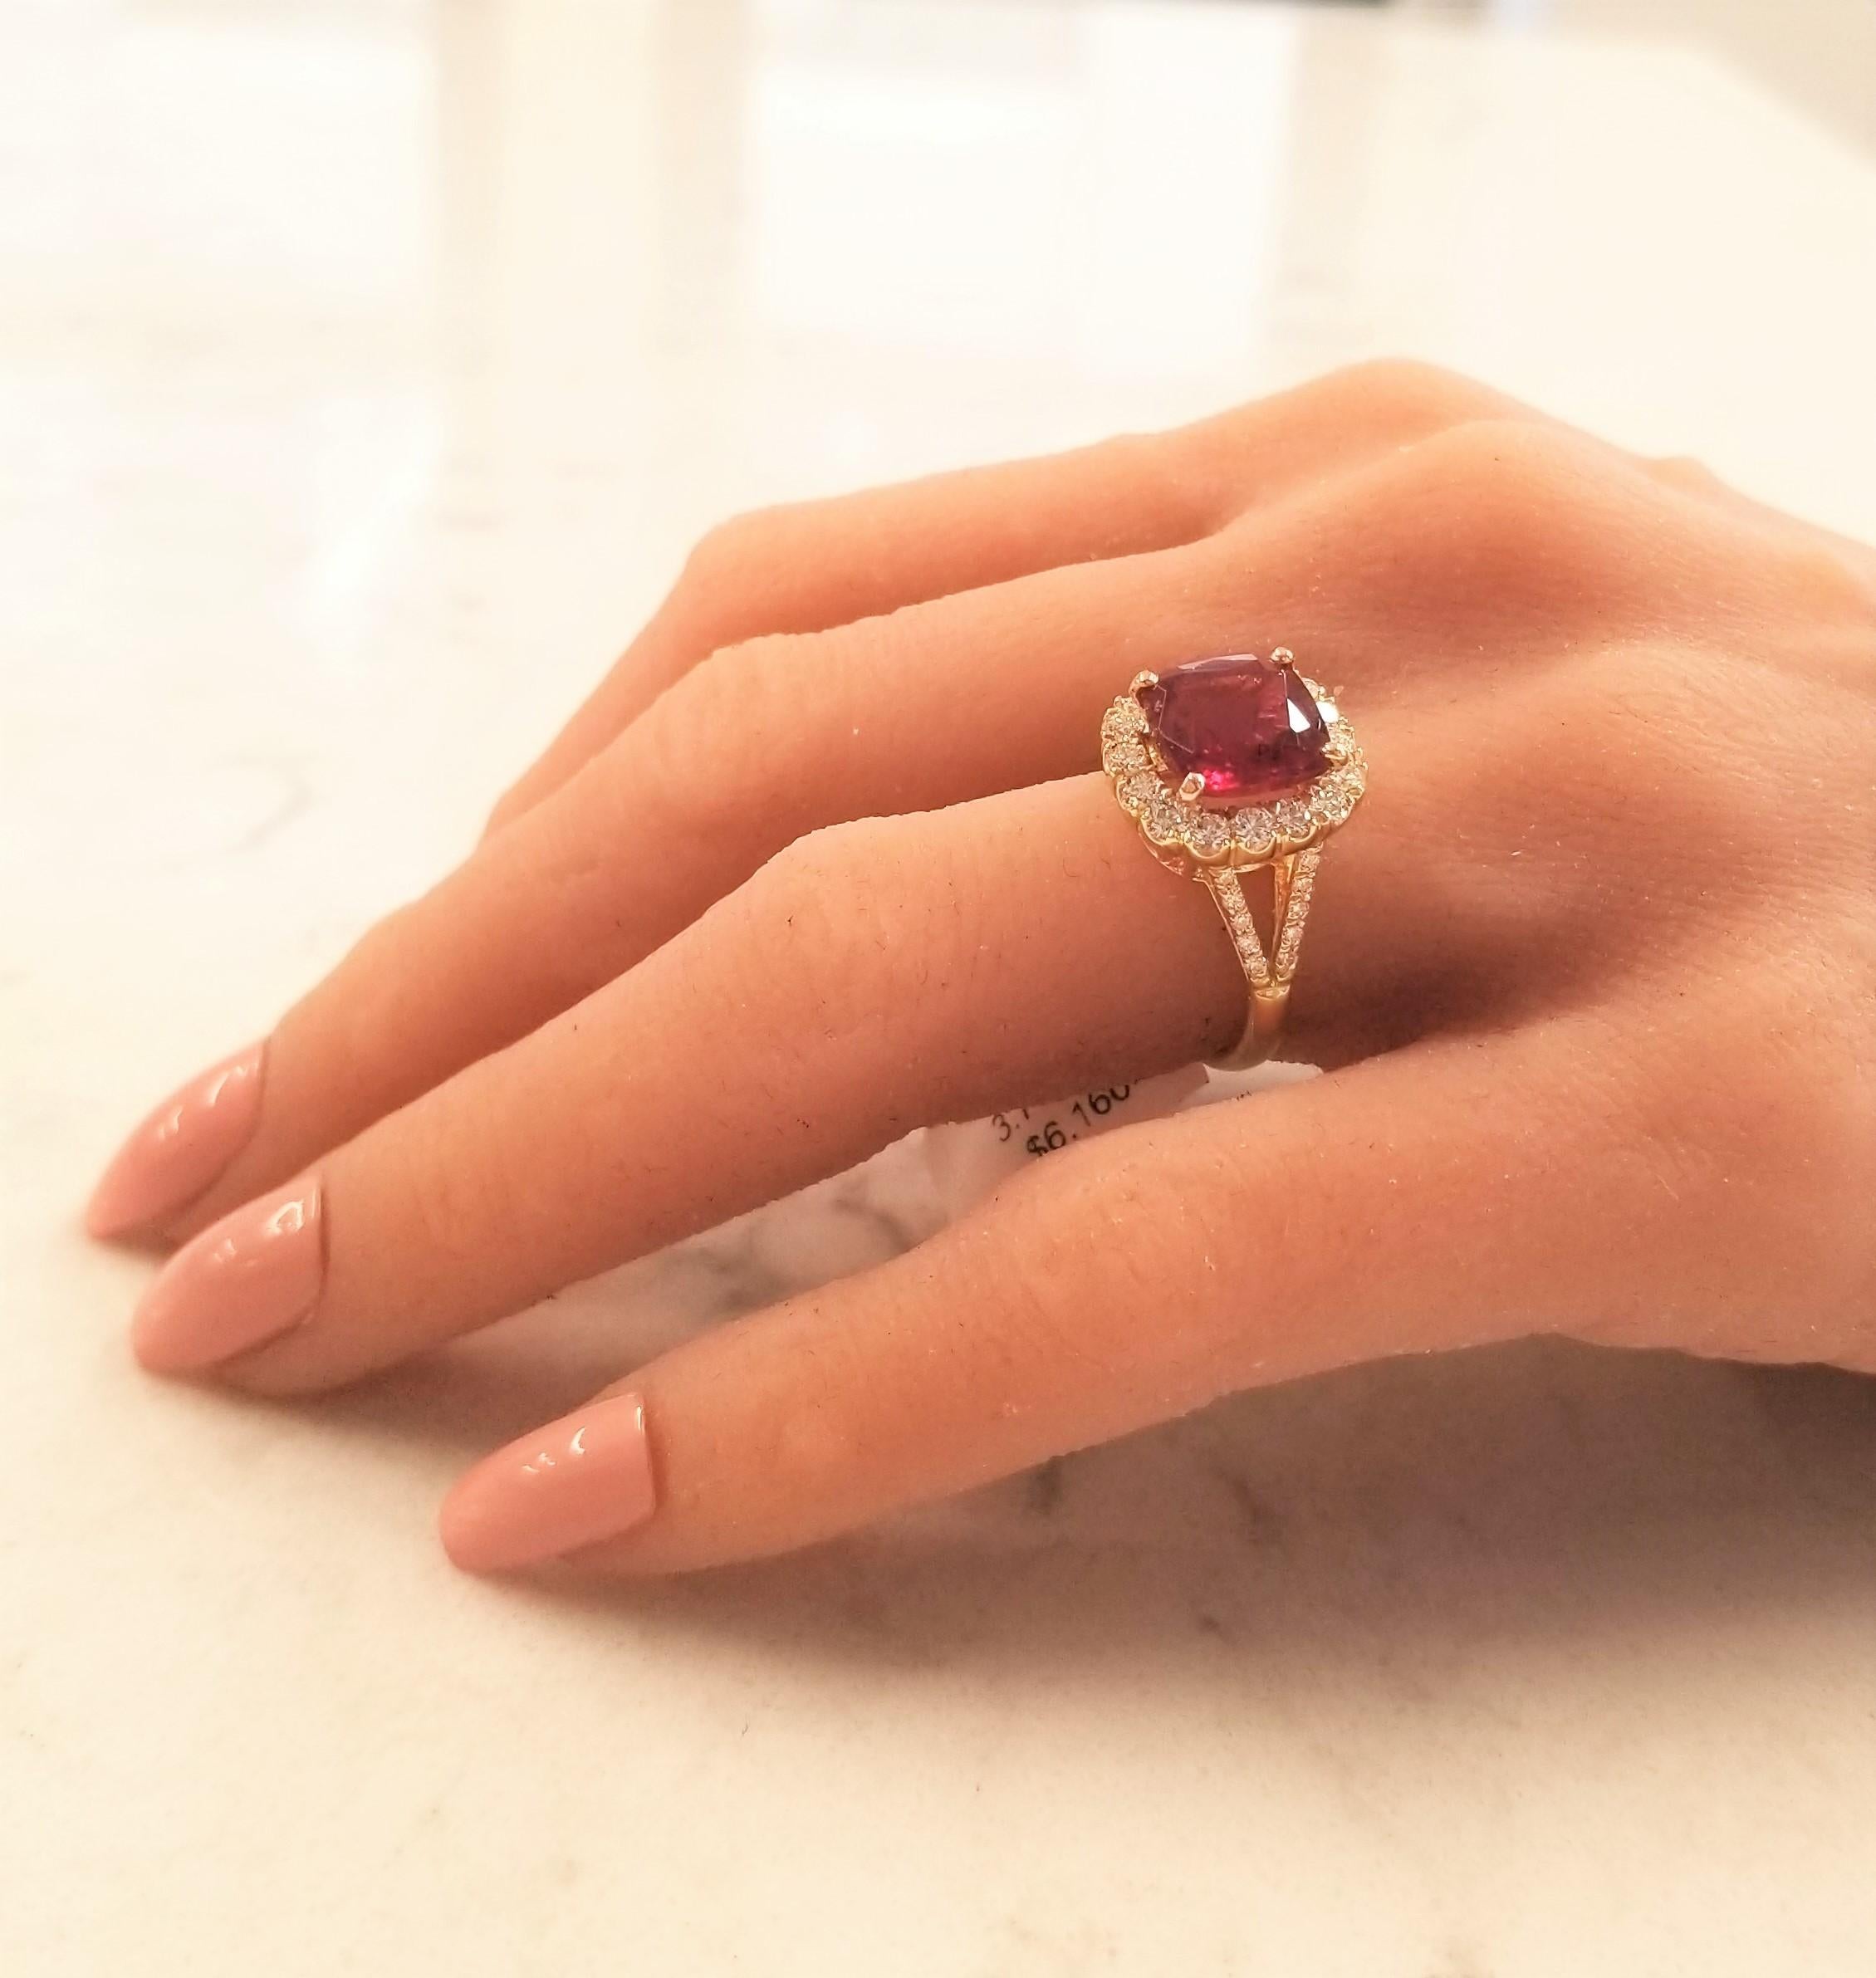 Contemporary 3.78 Carat Cushion Cut Rubelite and Diamond Cocktail Ring in 18 Karat Gold